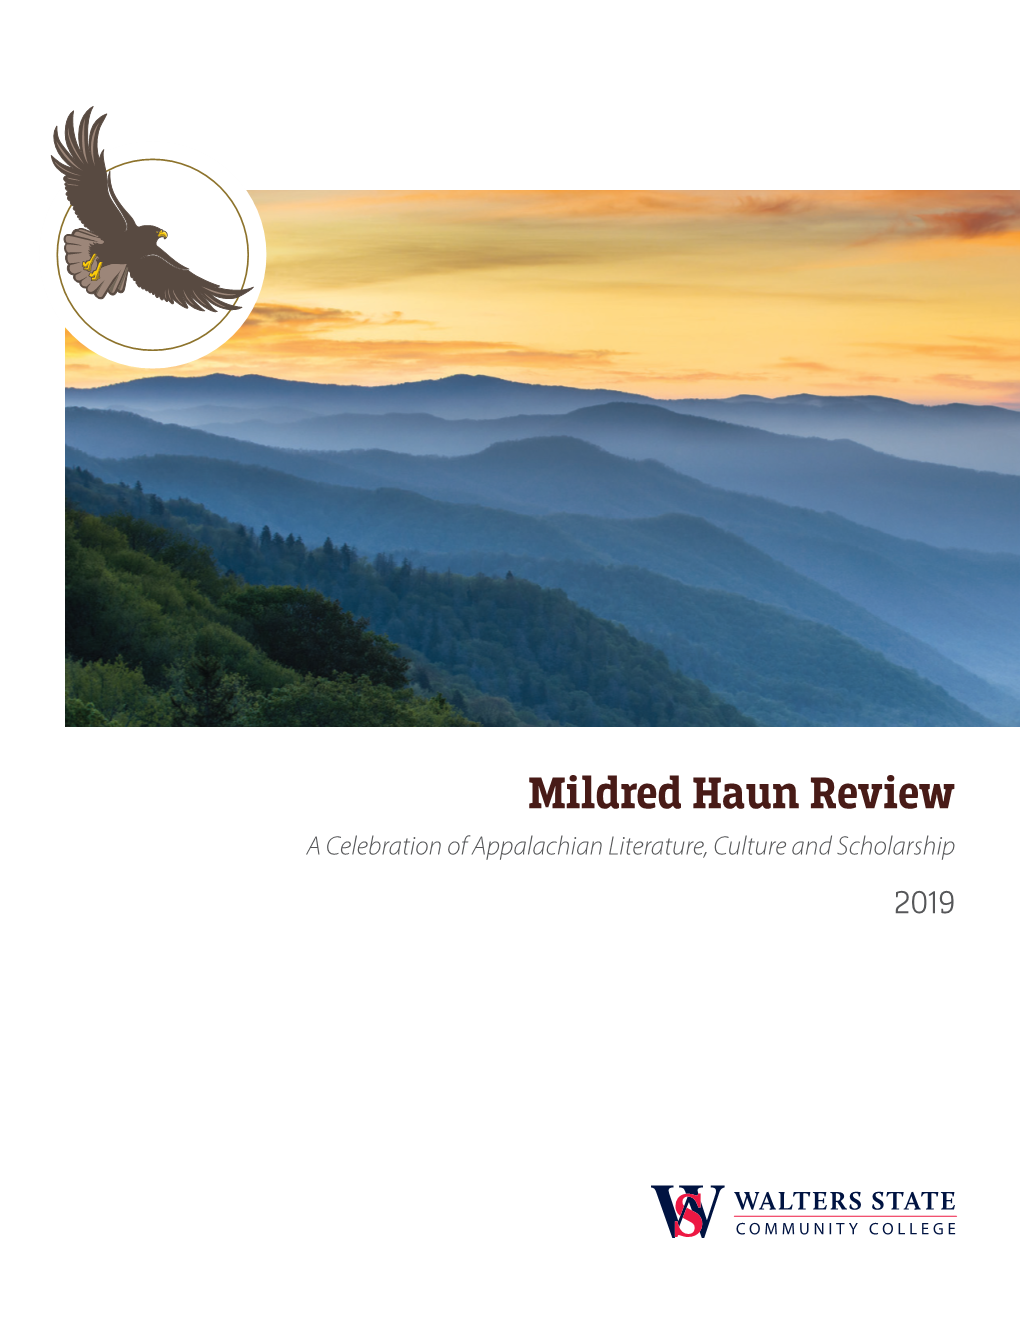 Mildred Haun Review a Celebration of Appalachian Literature, Culture and Scholarship 2019 Table of Contents